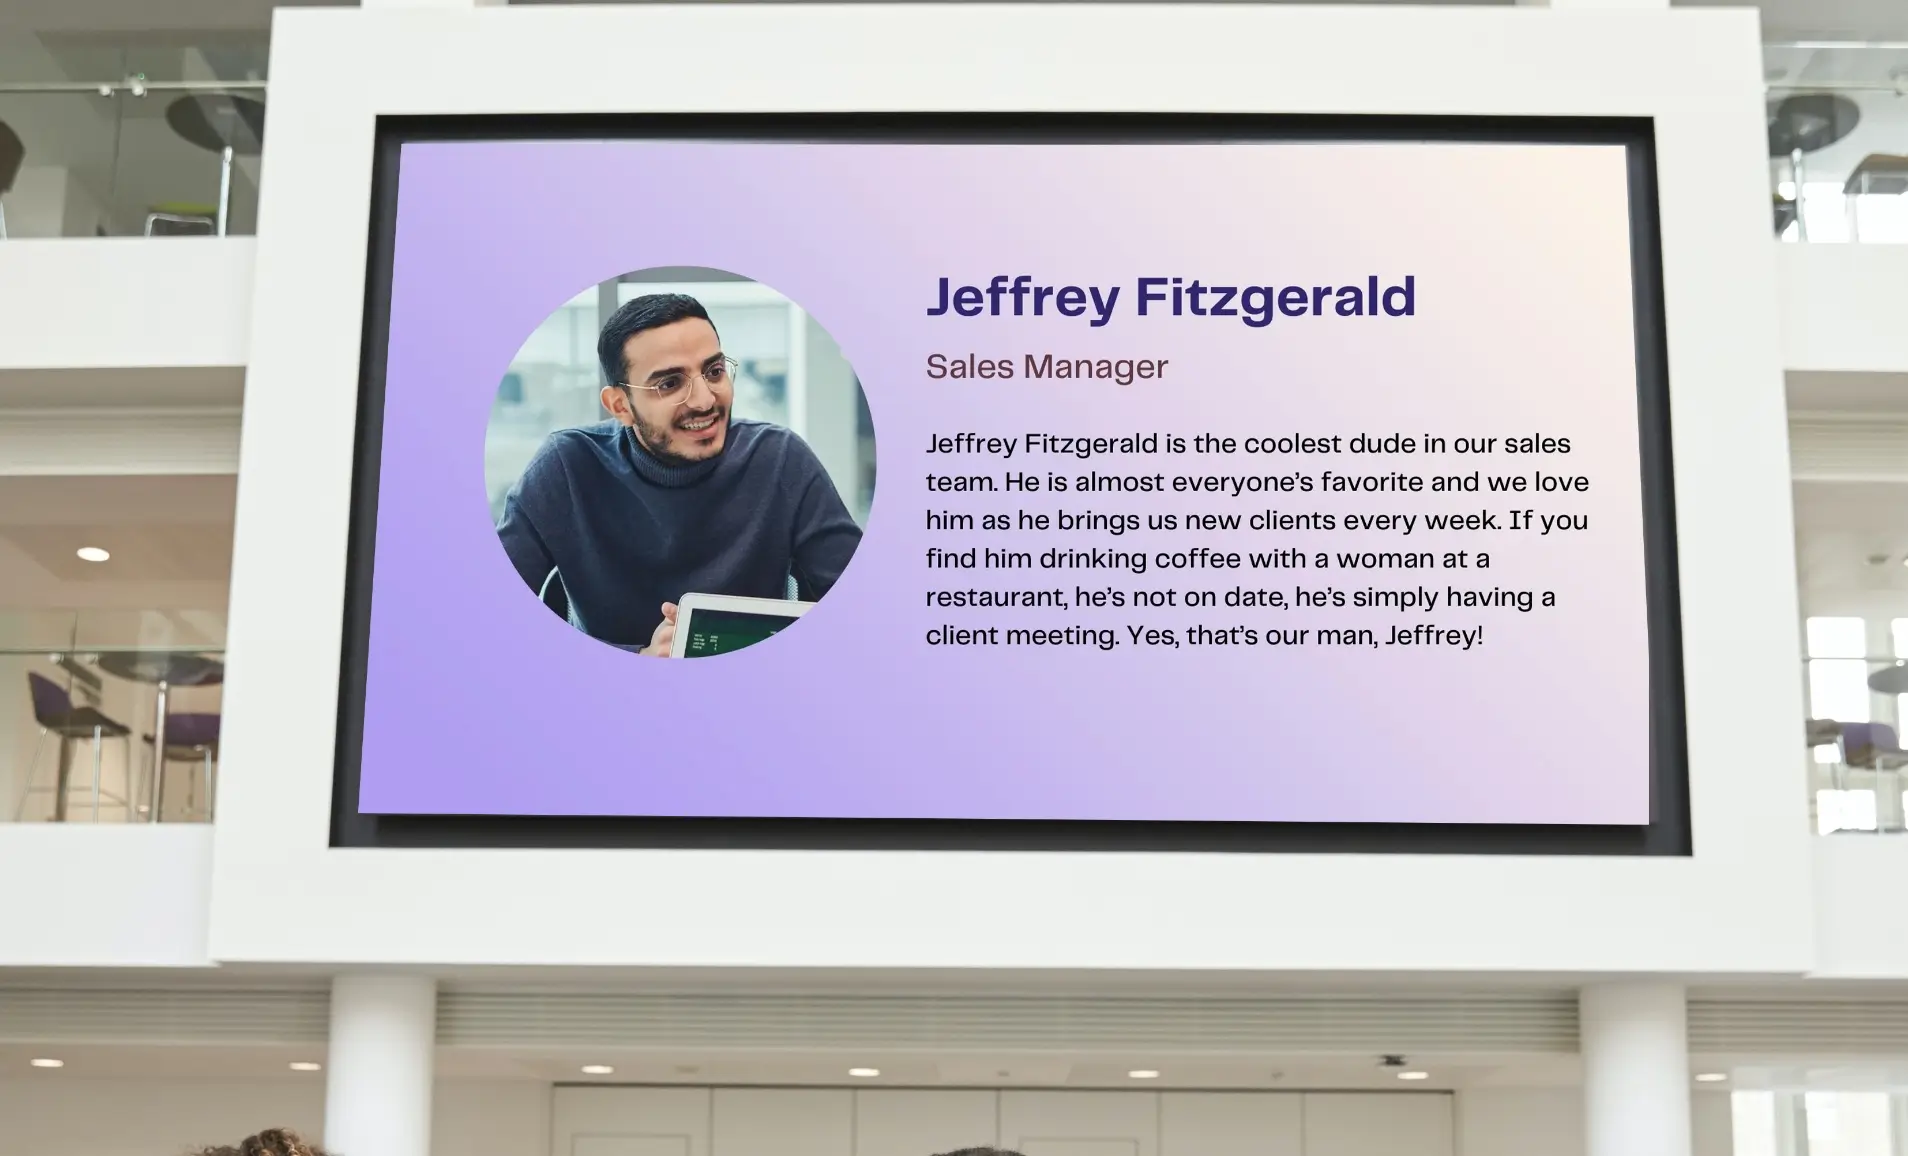 digital signage at the entrace of a meeting room displaying team profiles from Meet Your Team app